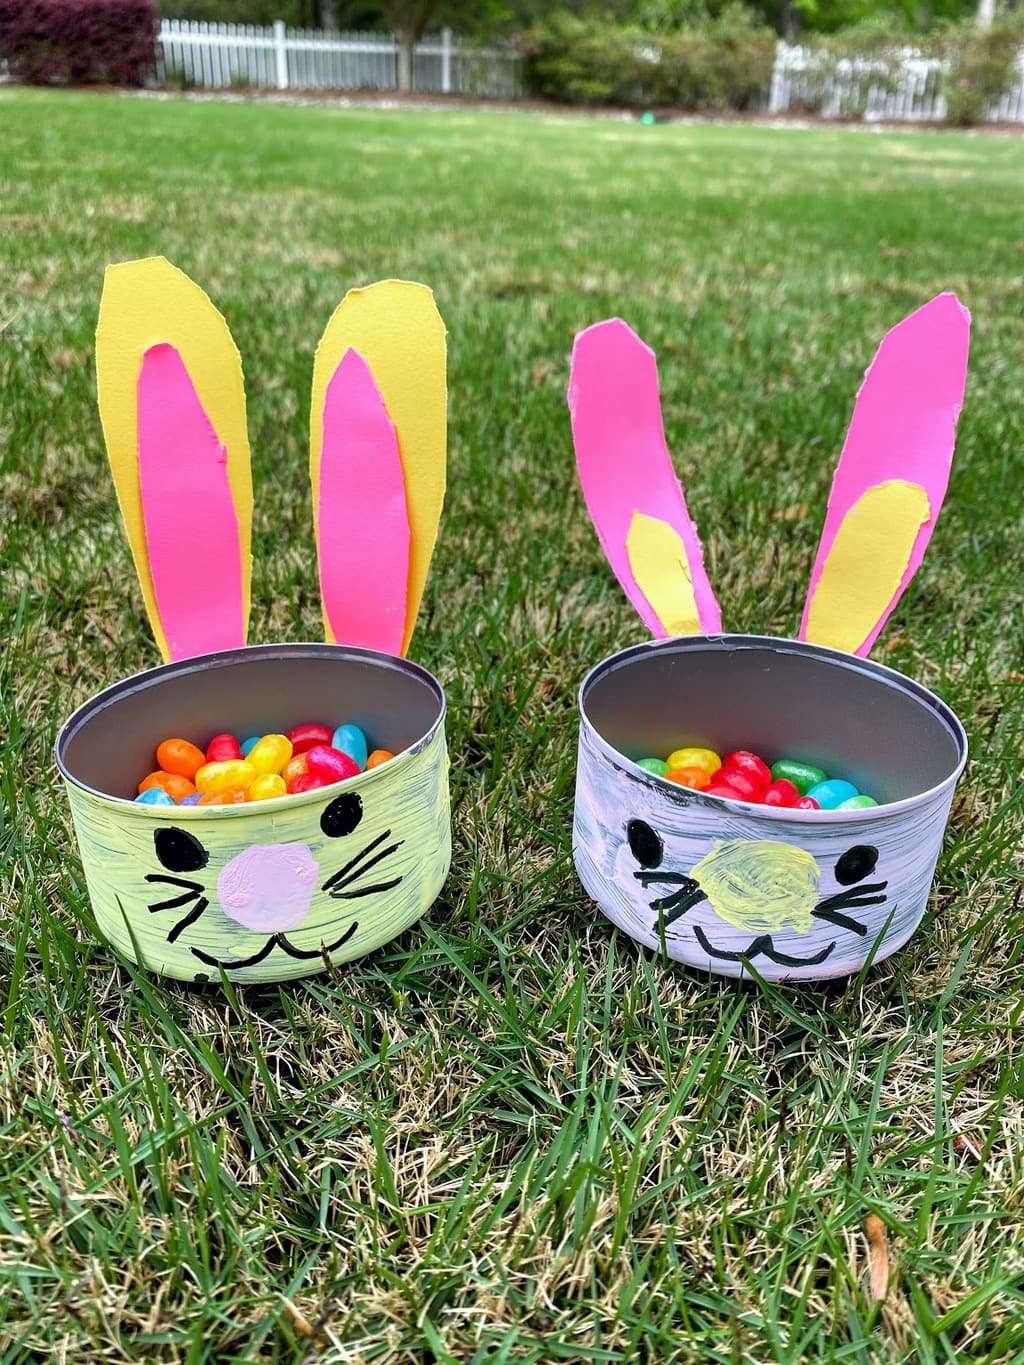 DIY bunny candy dishes in grass